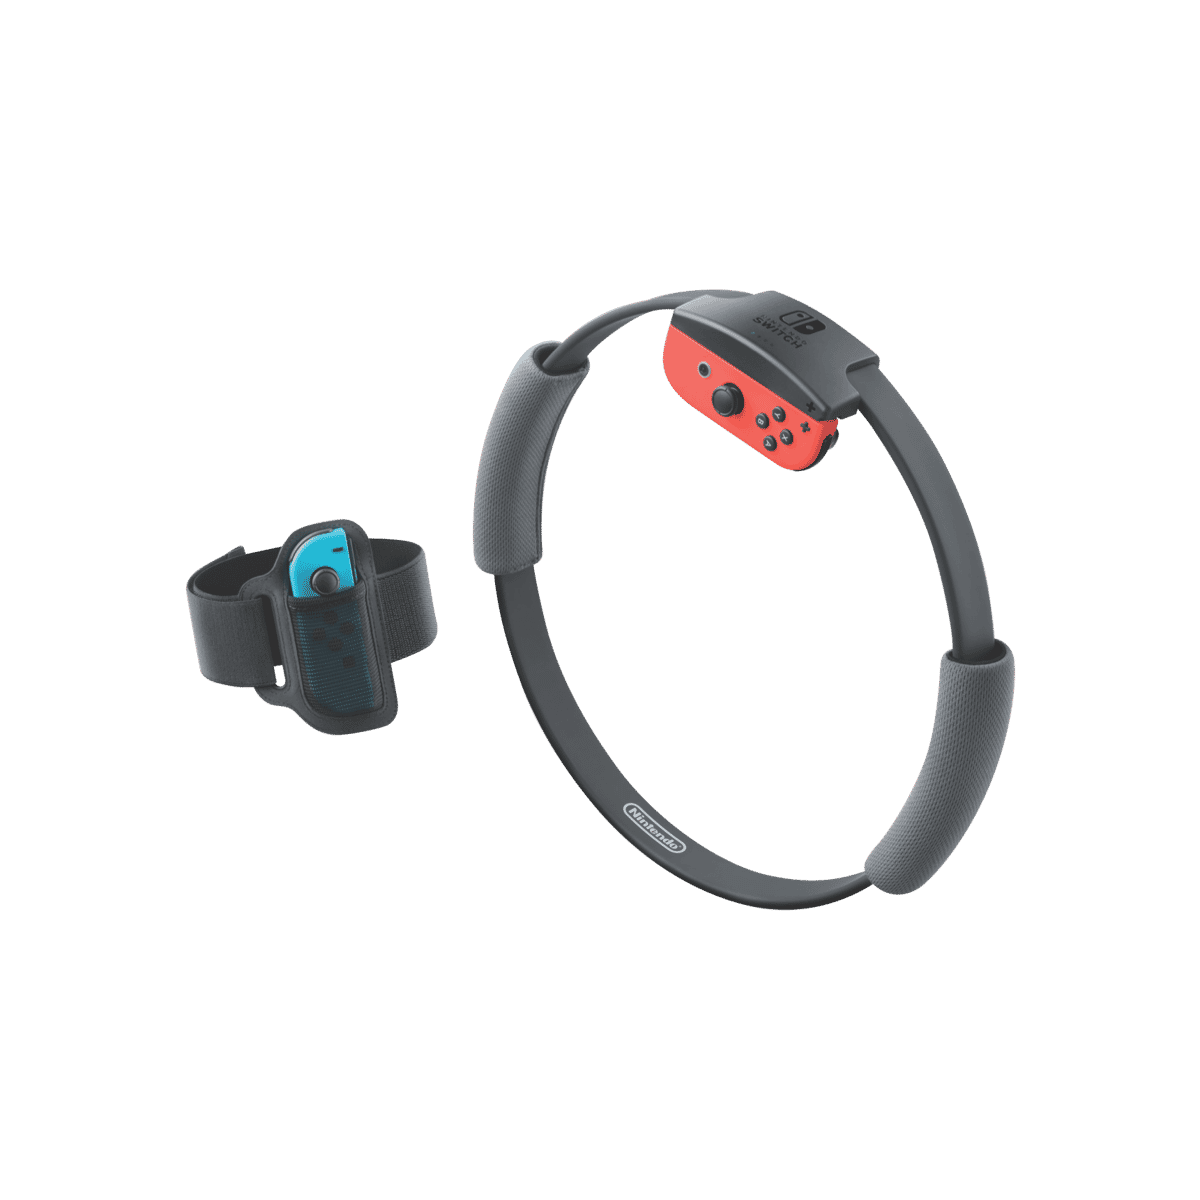 Nintendo Switch Ring Fit Adventure 98691